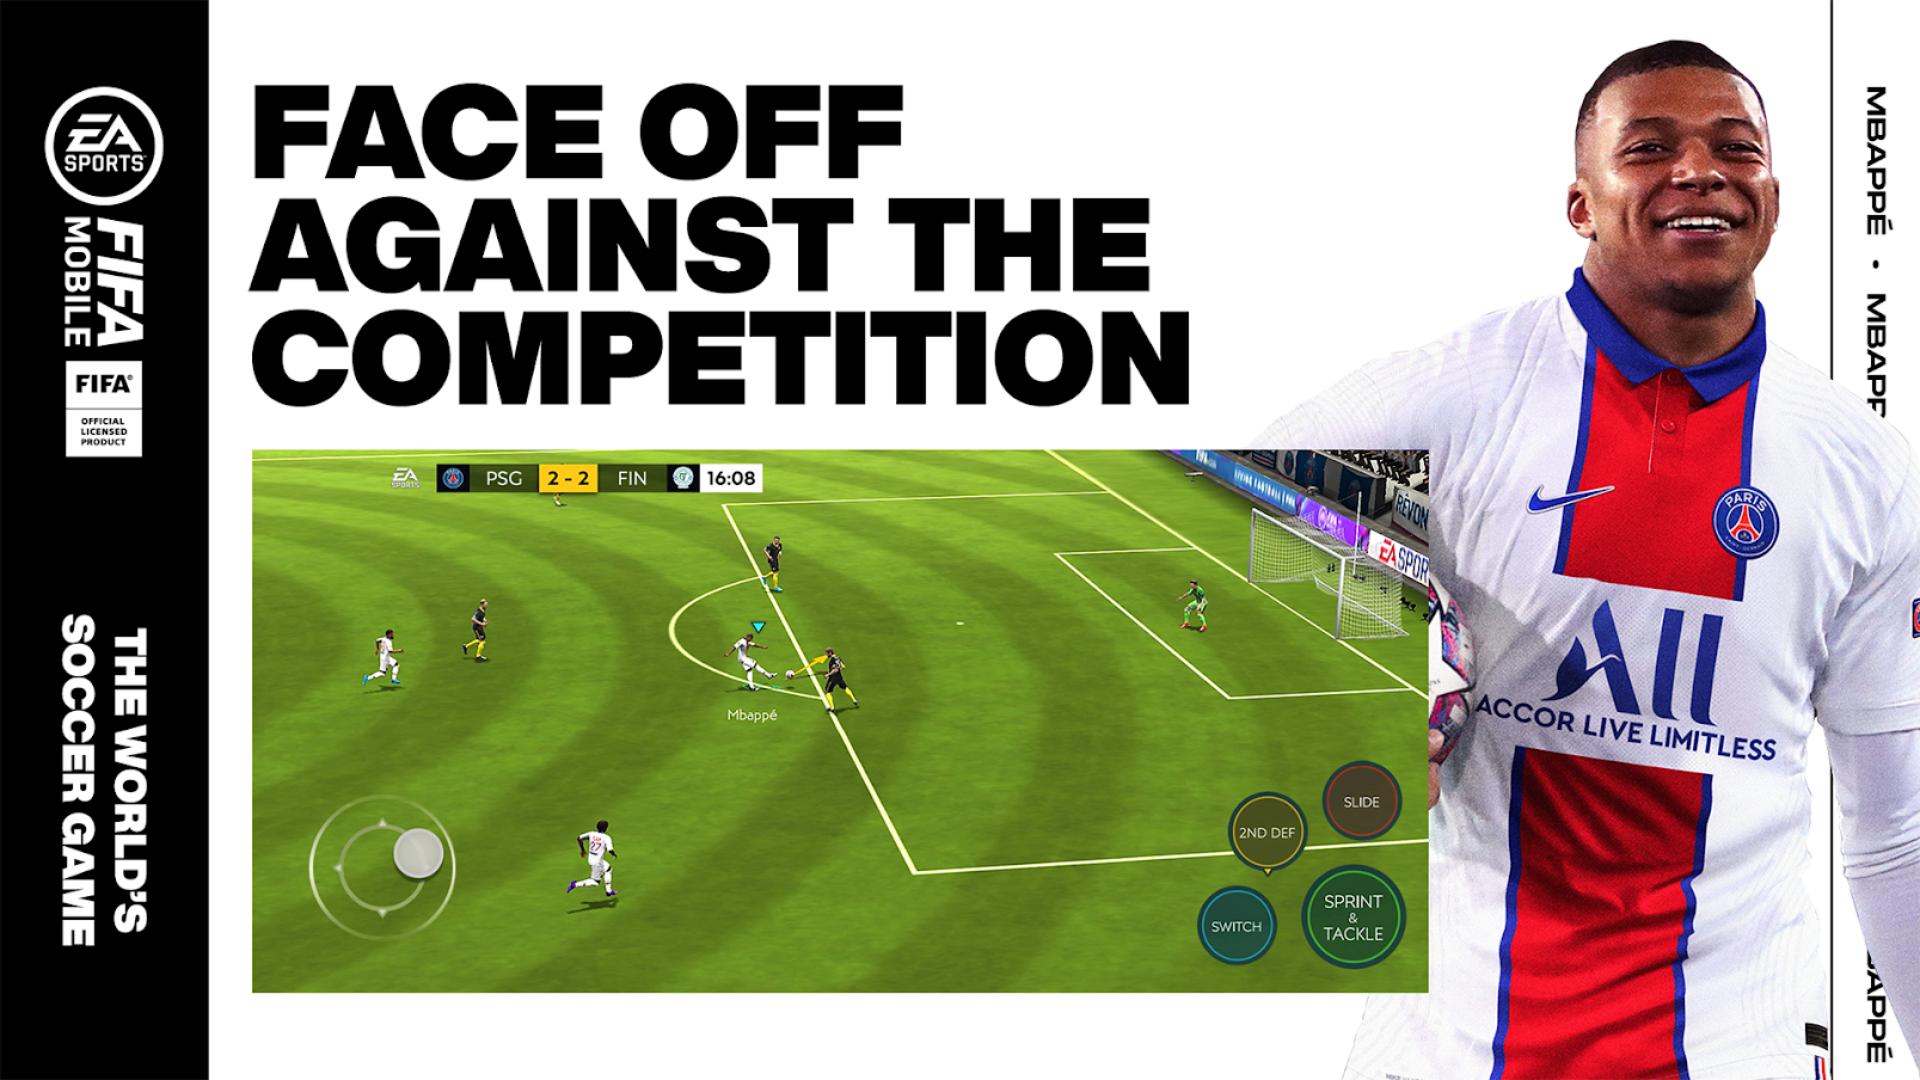 Best mobile sports games: FIFA Mobile. Image shows a player beside a screenshot with players on the pitch. Above it, it says "Face off against the competition" to the left is a black bar with the FIA logo, the EA Sports logo, and text reading "The world's soccer game"